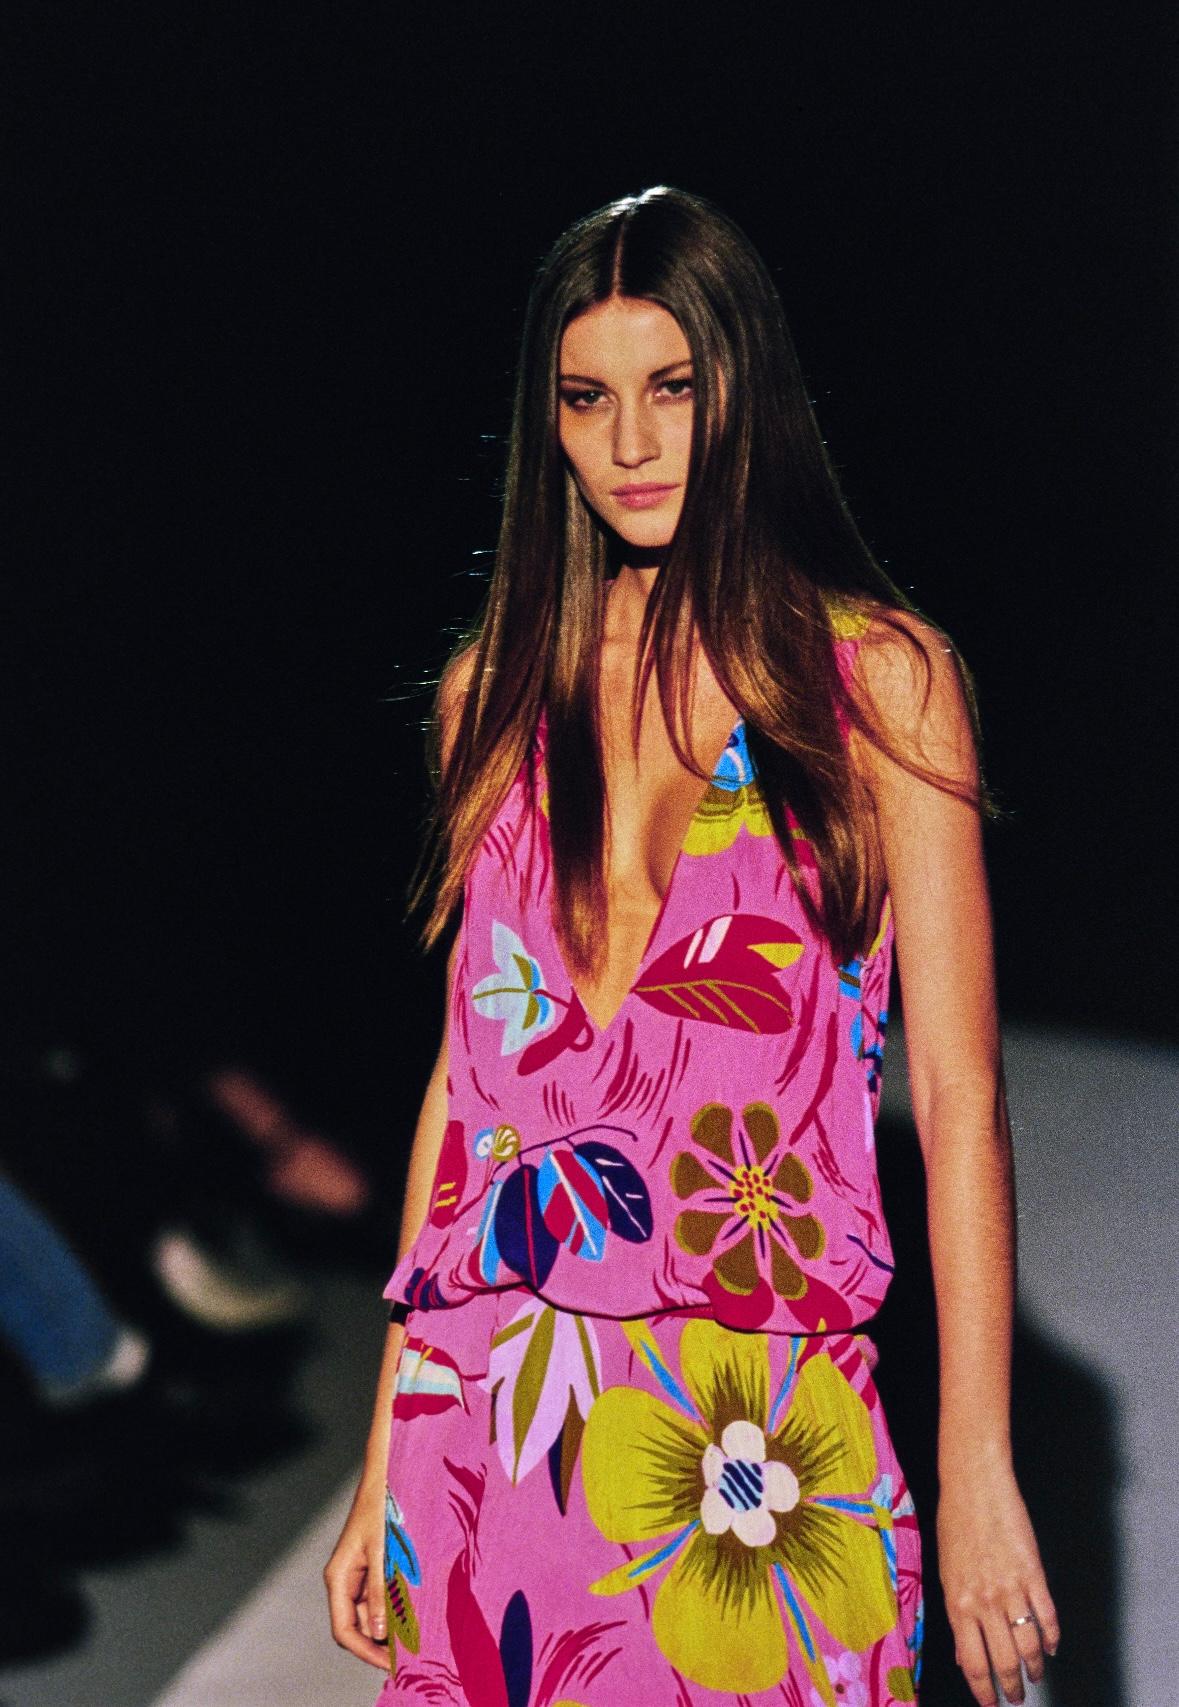 Presenting a psychedelic pink ruffled silk sleeveless flower power dress designed by Tom Ford for Gucci's Spring/Summer 1999 collection. Known as the 